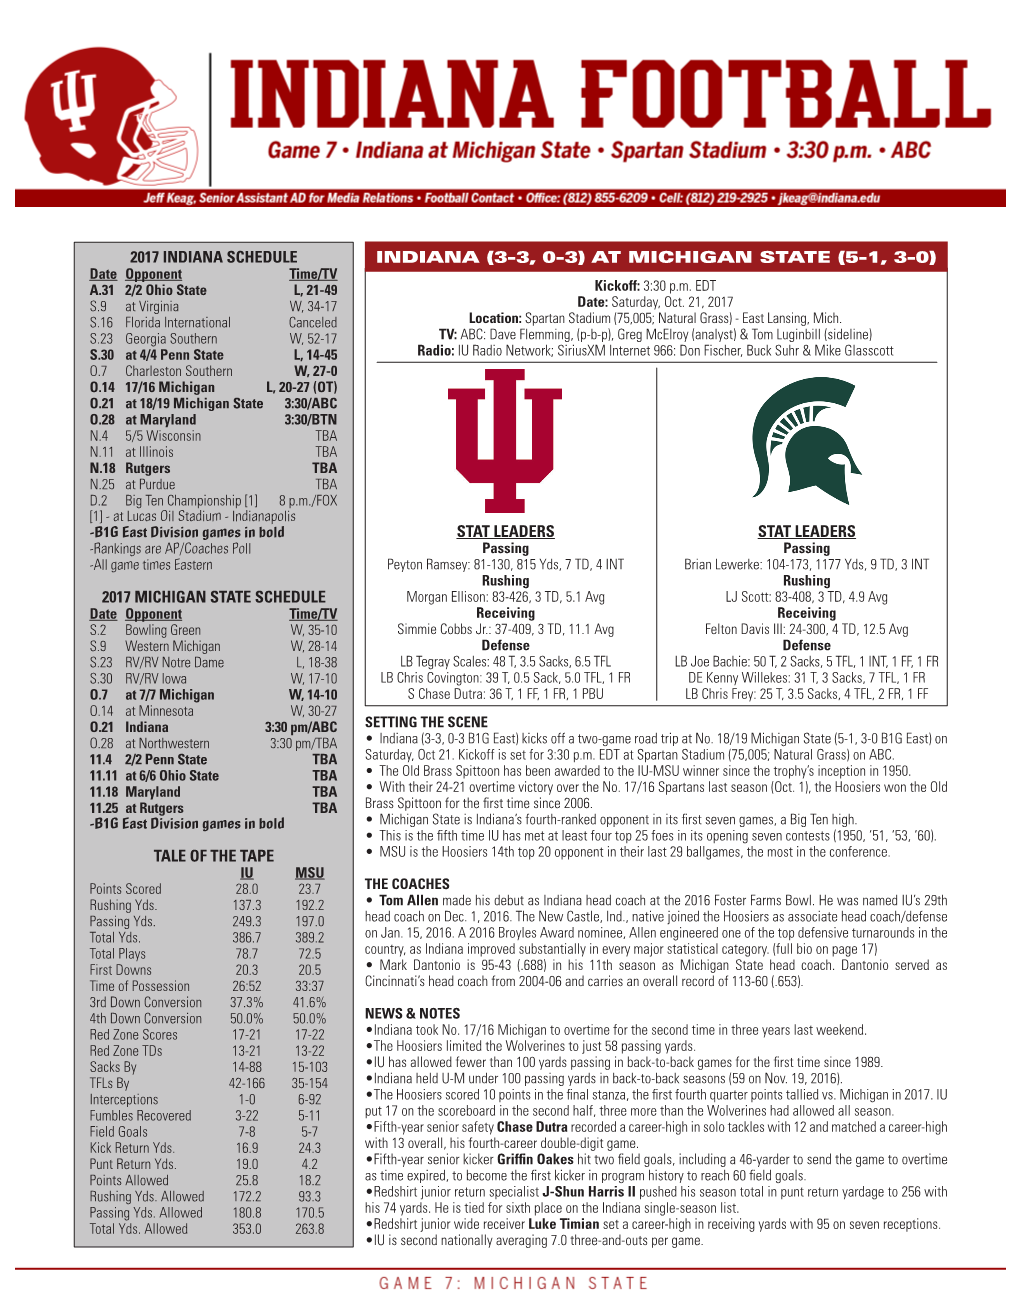 AT MICHIGAN STATE (5-1, 3-0) Date Opponent Time/TV A.31 2/2 Ohio State L, 21-49 Kickoff: 3:30 P.M